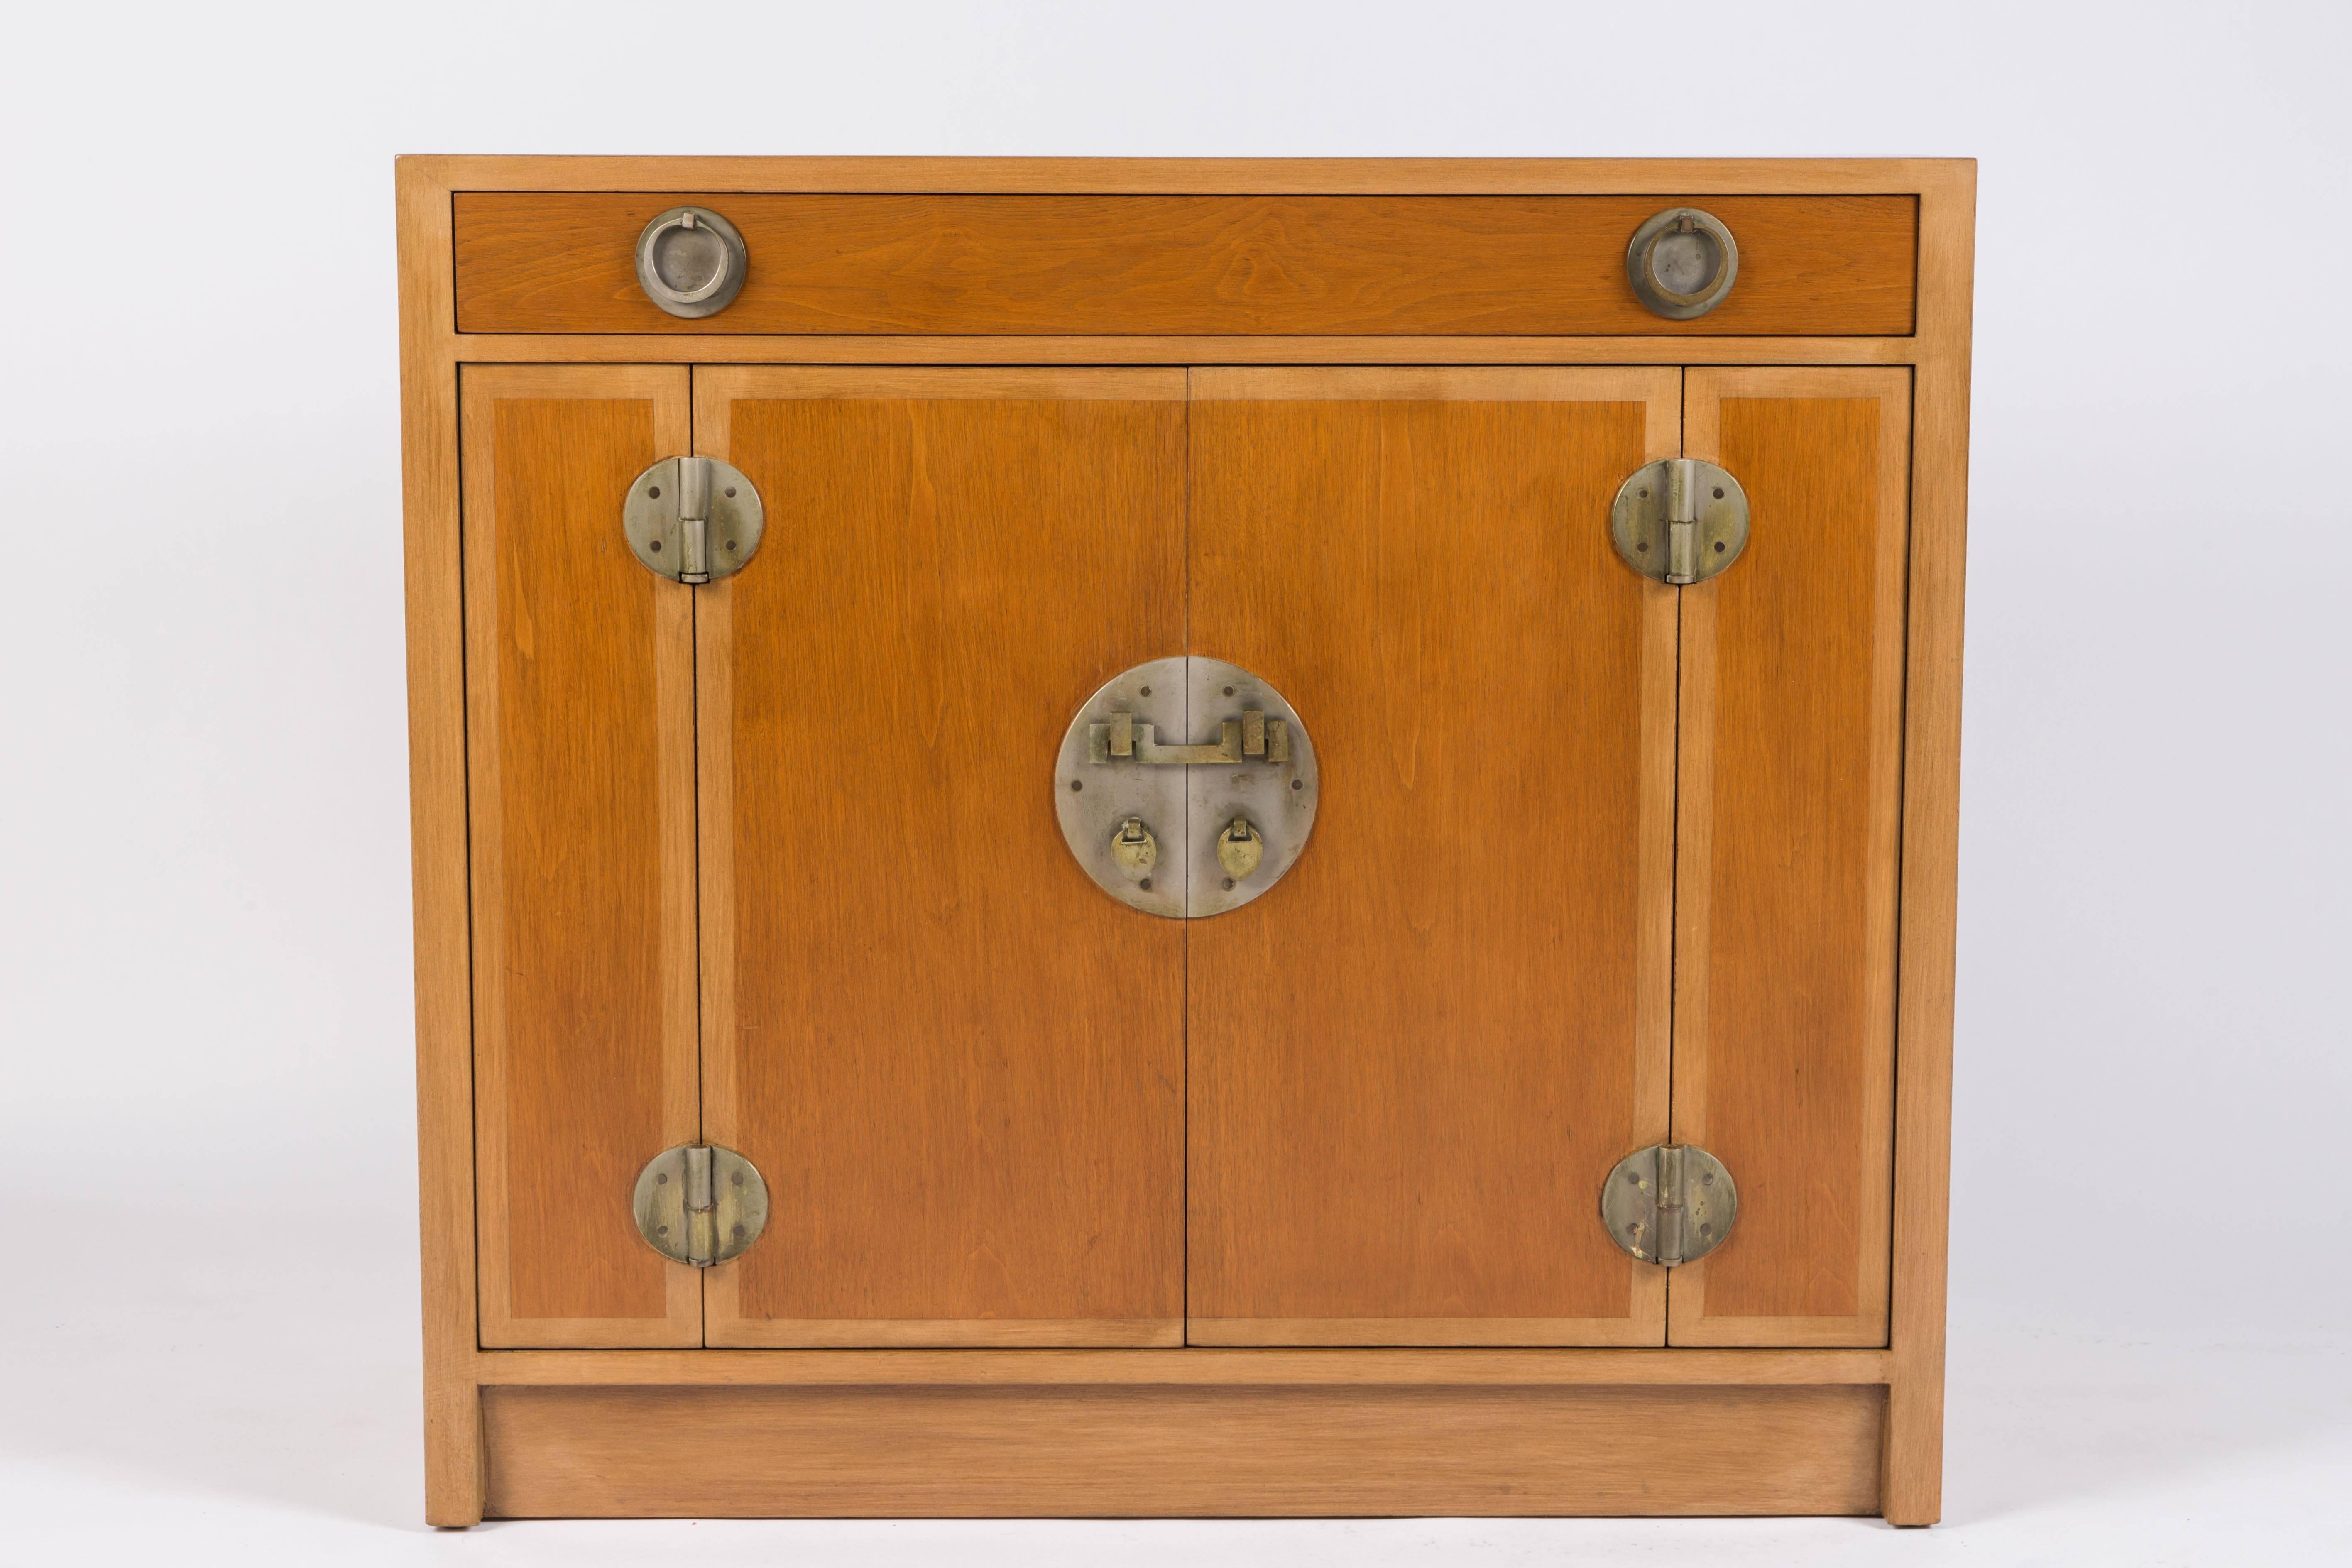 American Chinoiserie Inspired Cabinet Designed by Edward Wormley for Dunbar